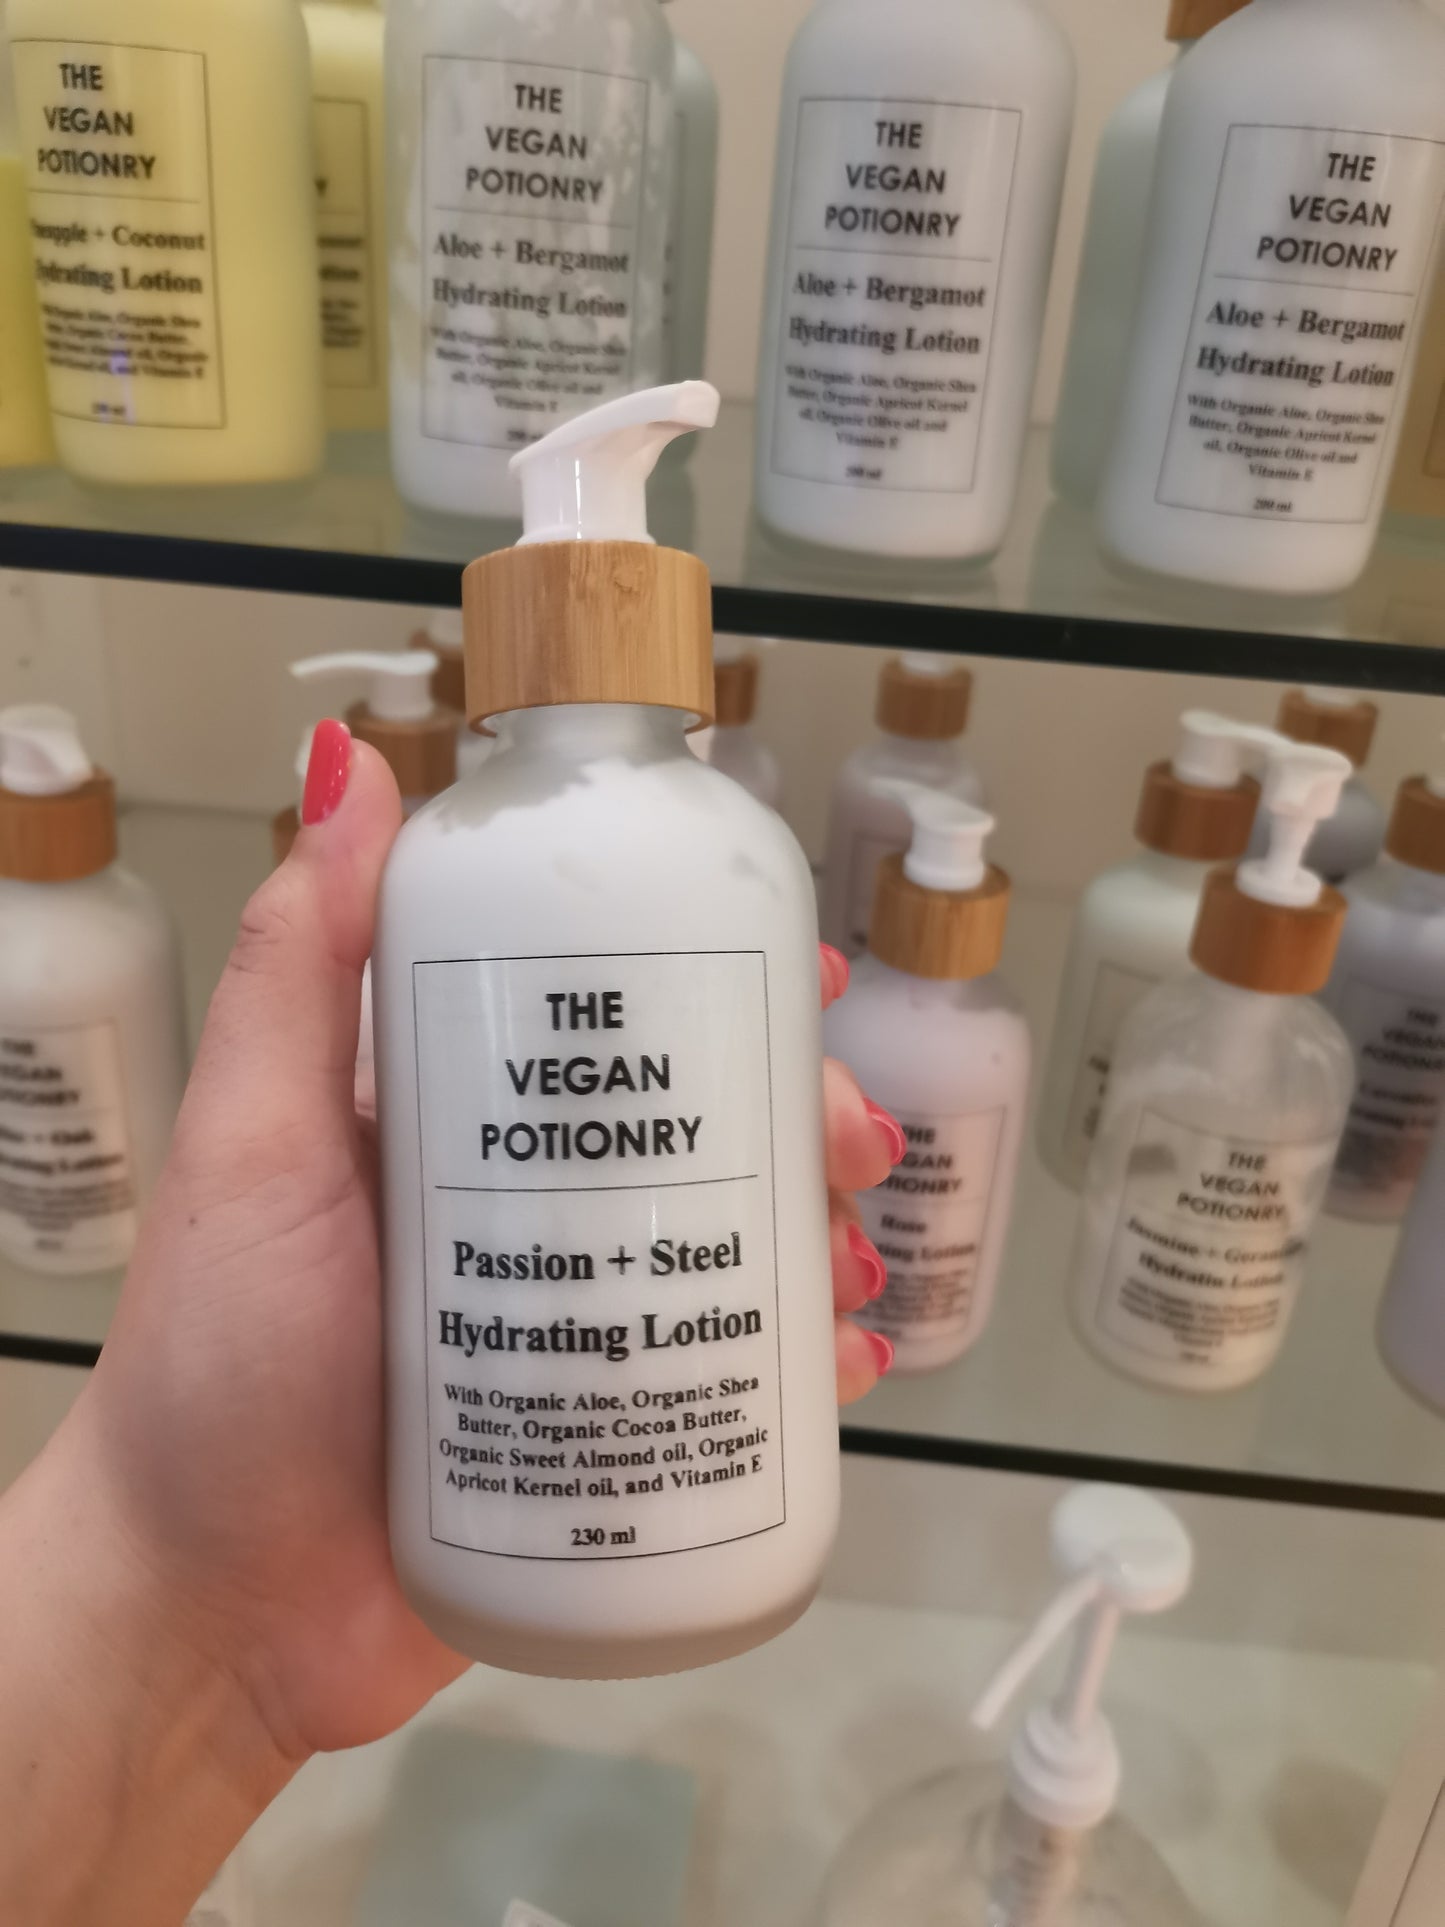 Passion + Steel Hydrating Lotion | The Vegan Potionry